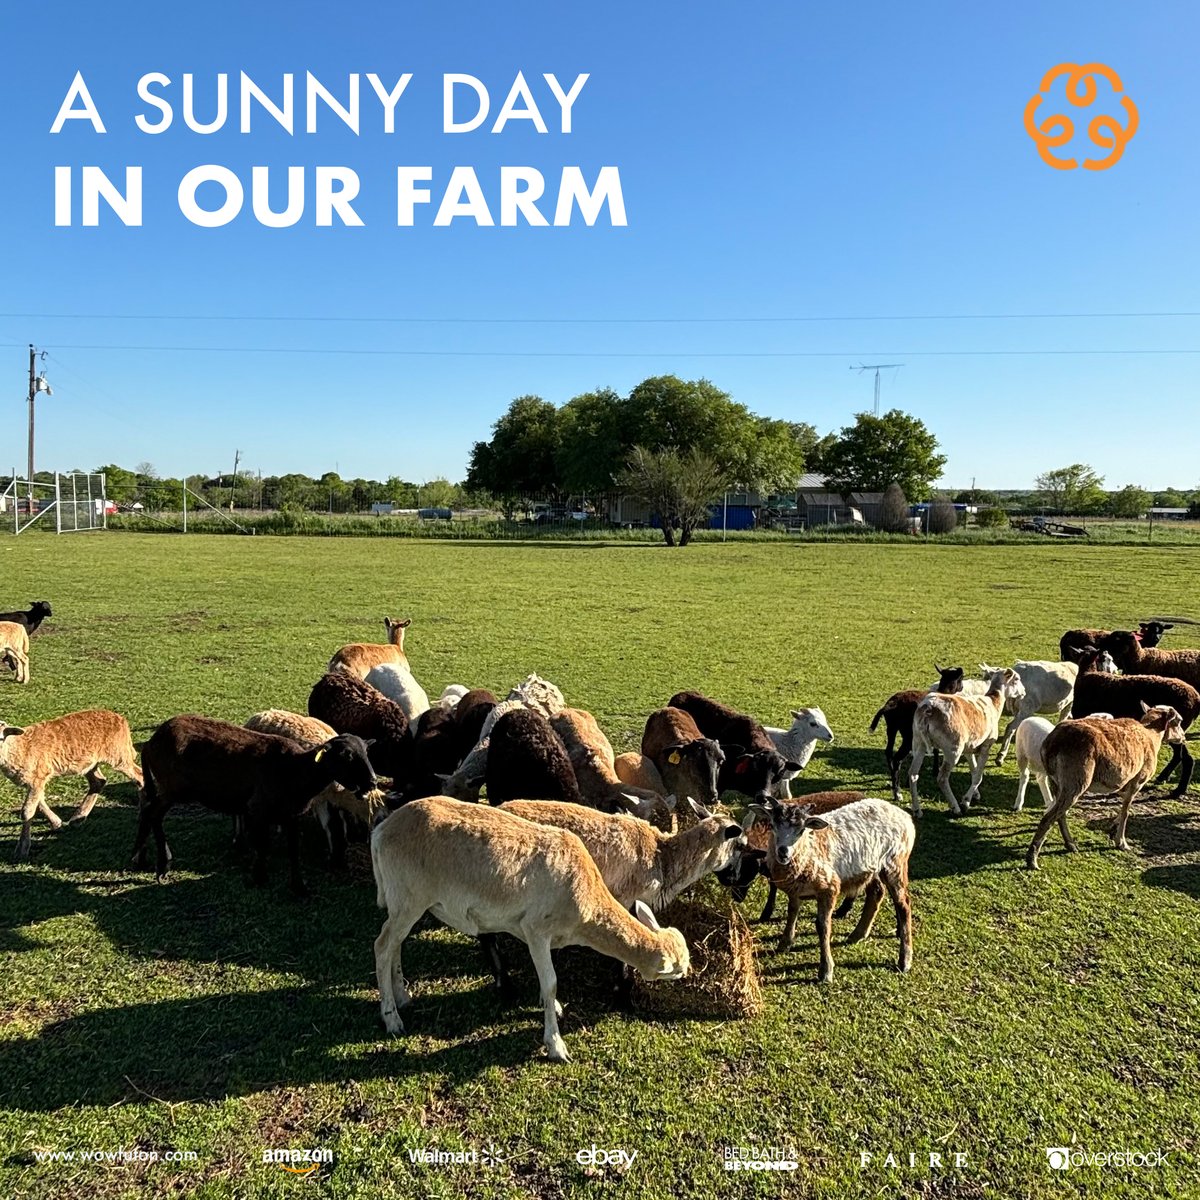 💤 The sun shines on our farm, where fun and natural miracles are always present.

🧡 Discover more at WoWFuton.com

#wowfuton
#organicsleep
#organicbedding
#amazon
#walmart
#ebay
#overstock
#bedbathandbeyond
#faire